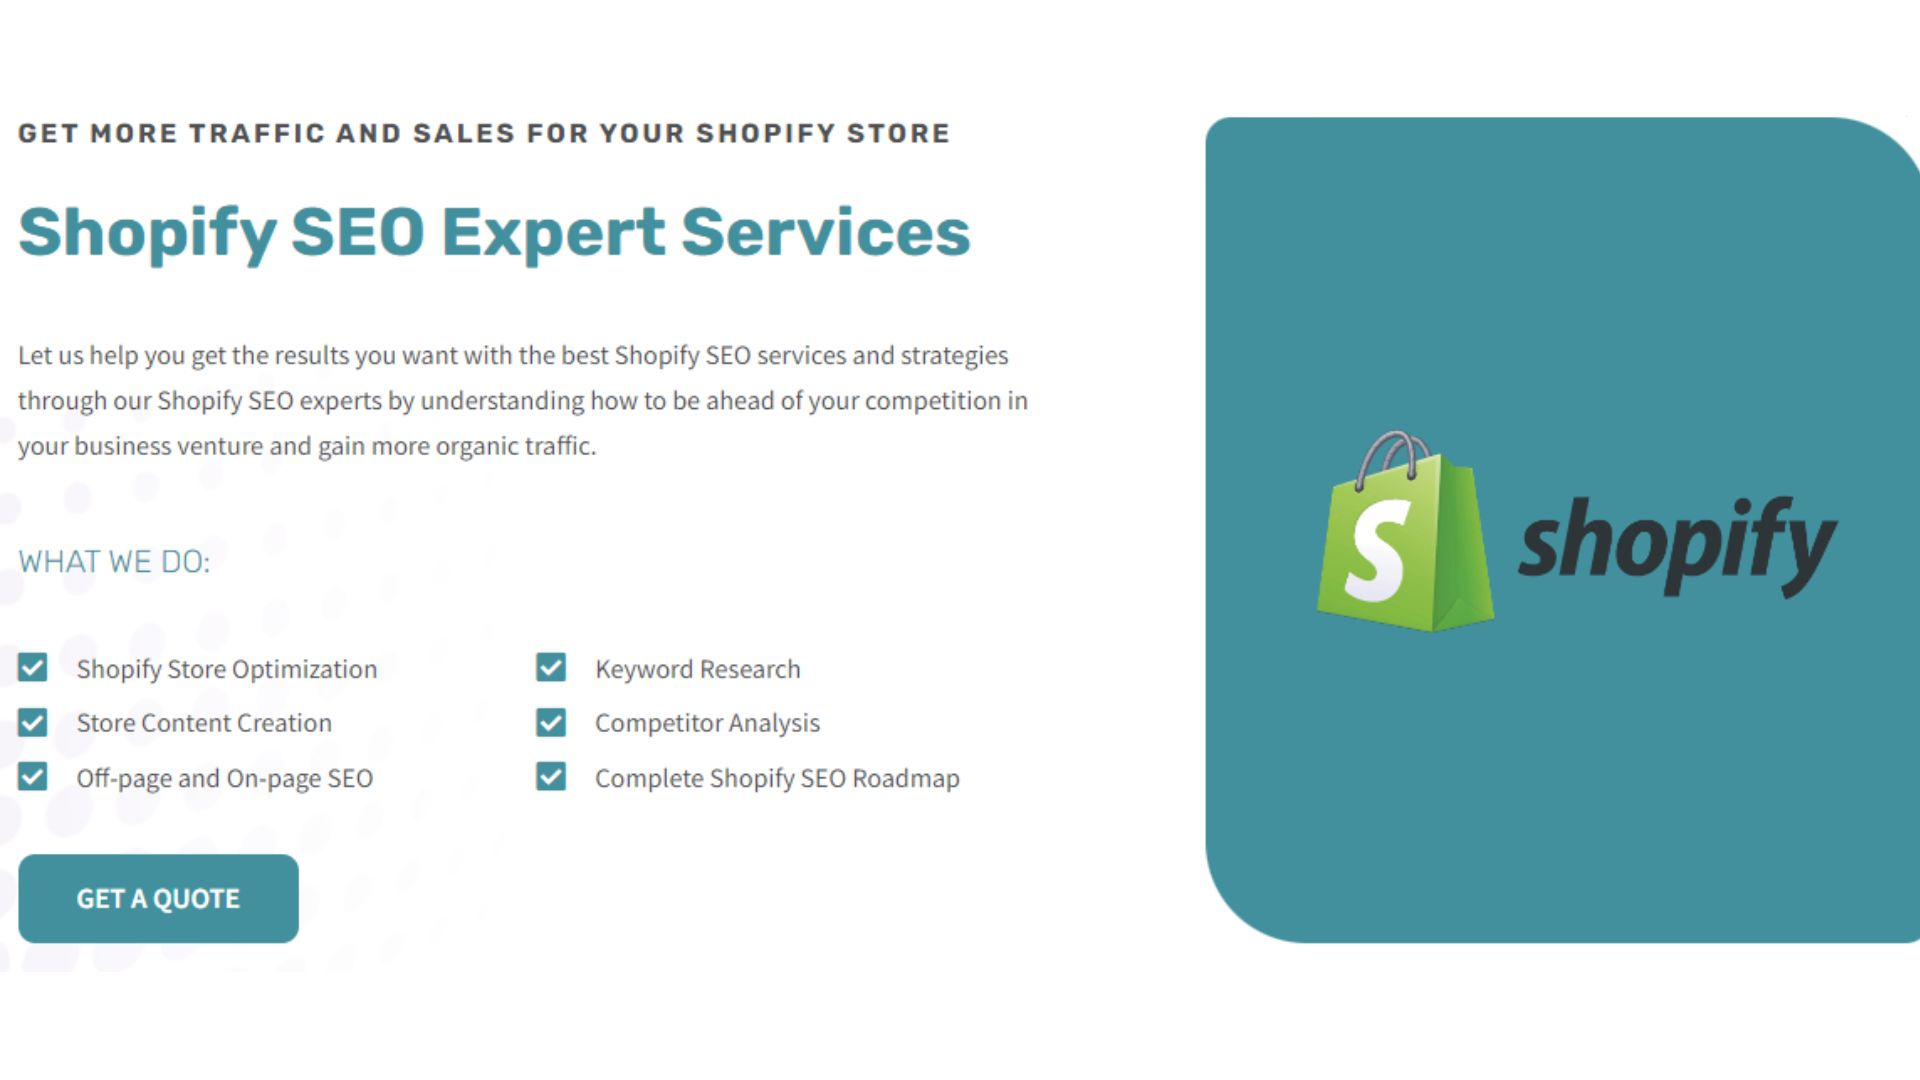 What Services Does A Shopify Seo Specialist Offer?